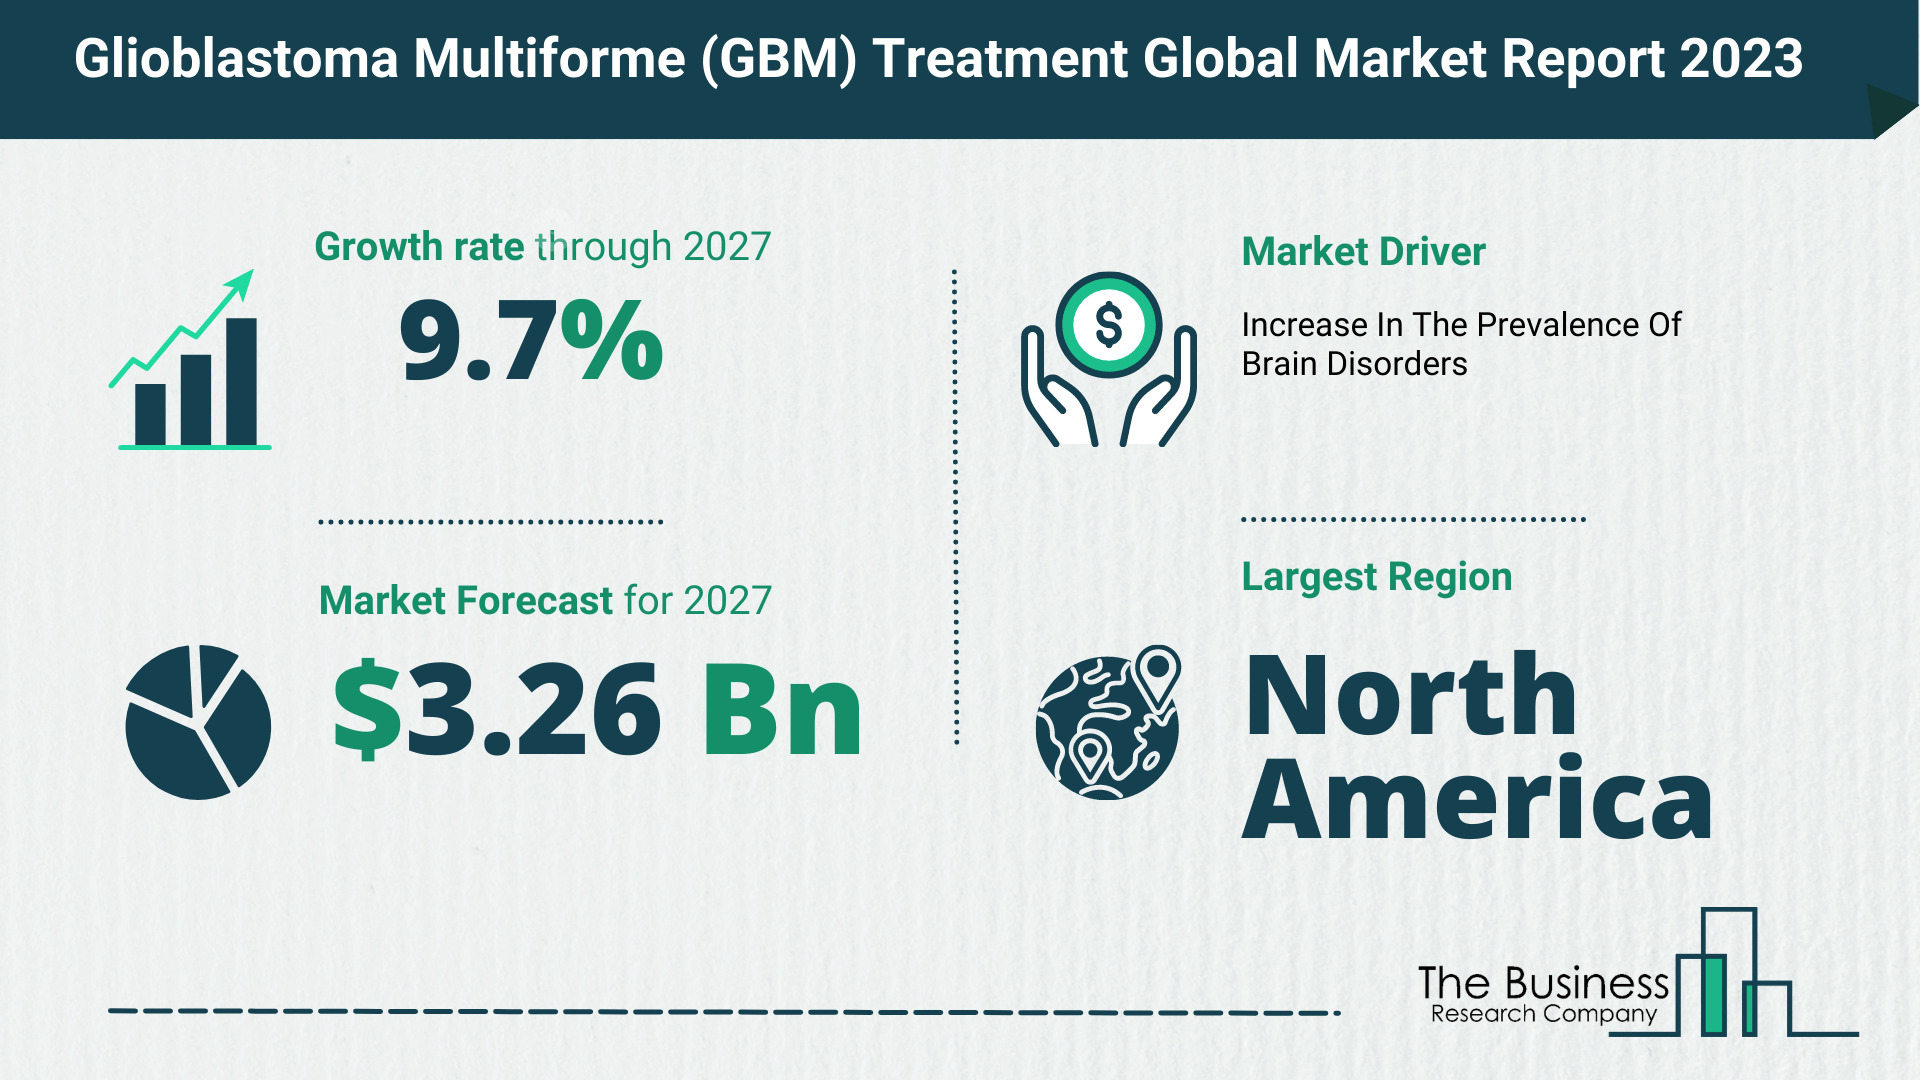 How Will The Glioblastoma Multiforme (GBM) Treatment Market Globally Expand In 2023?